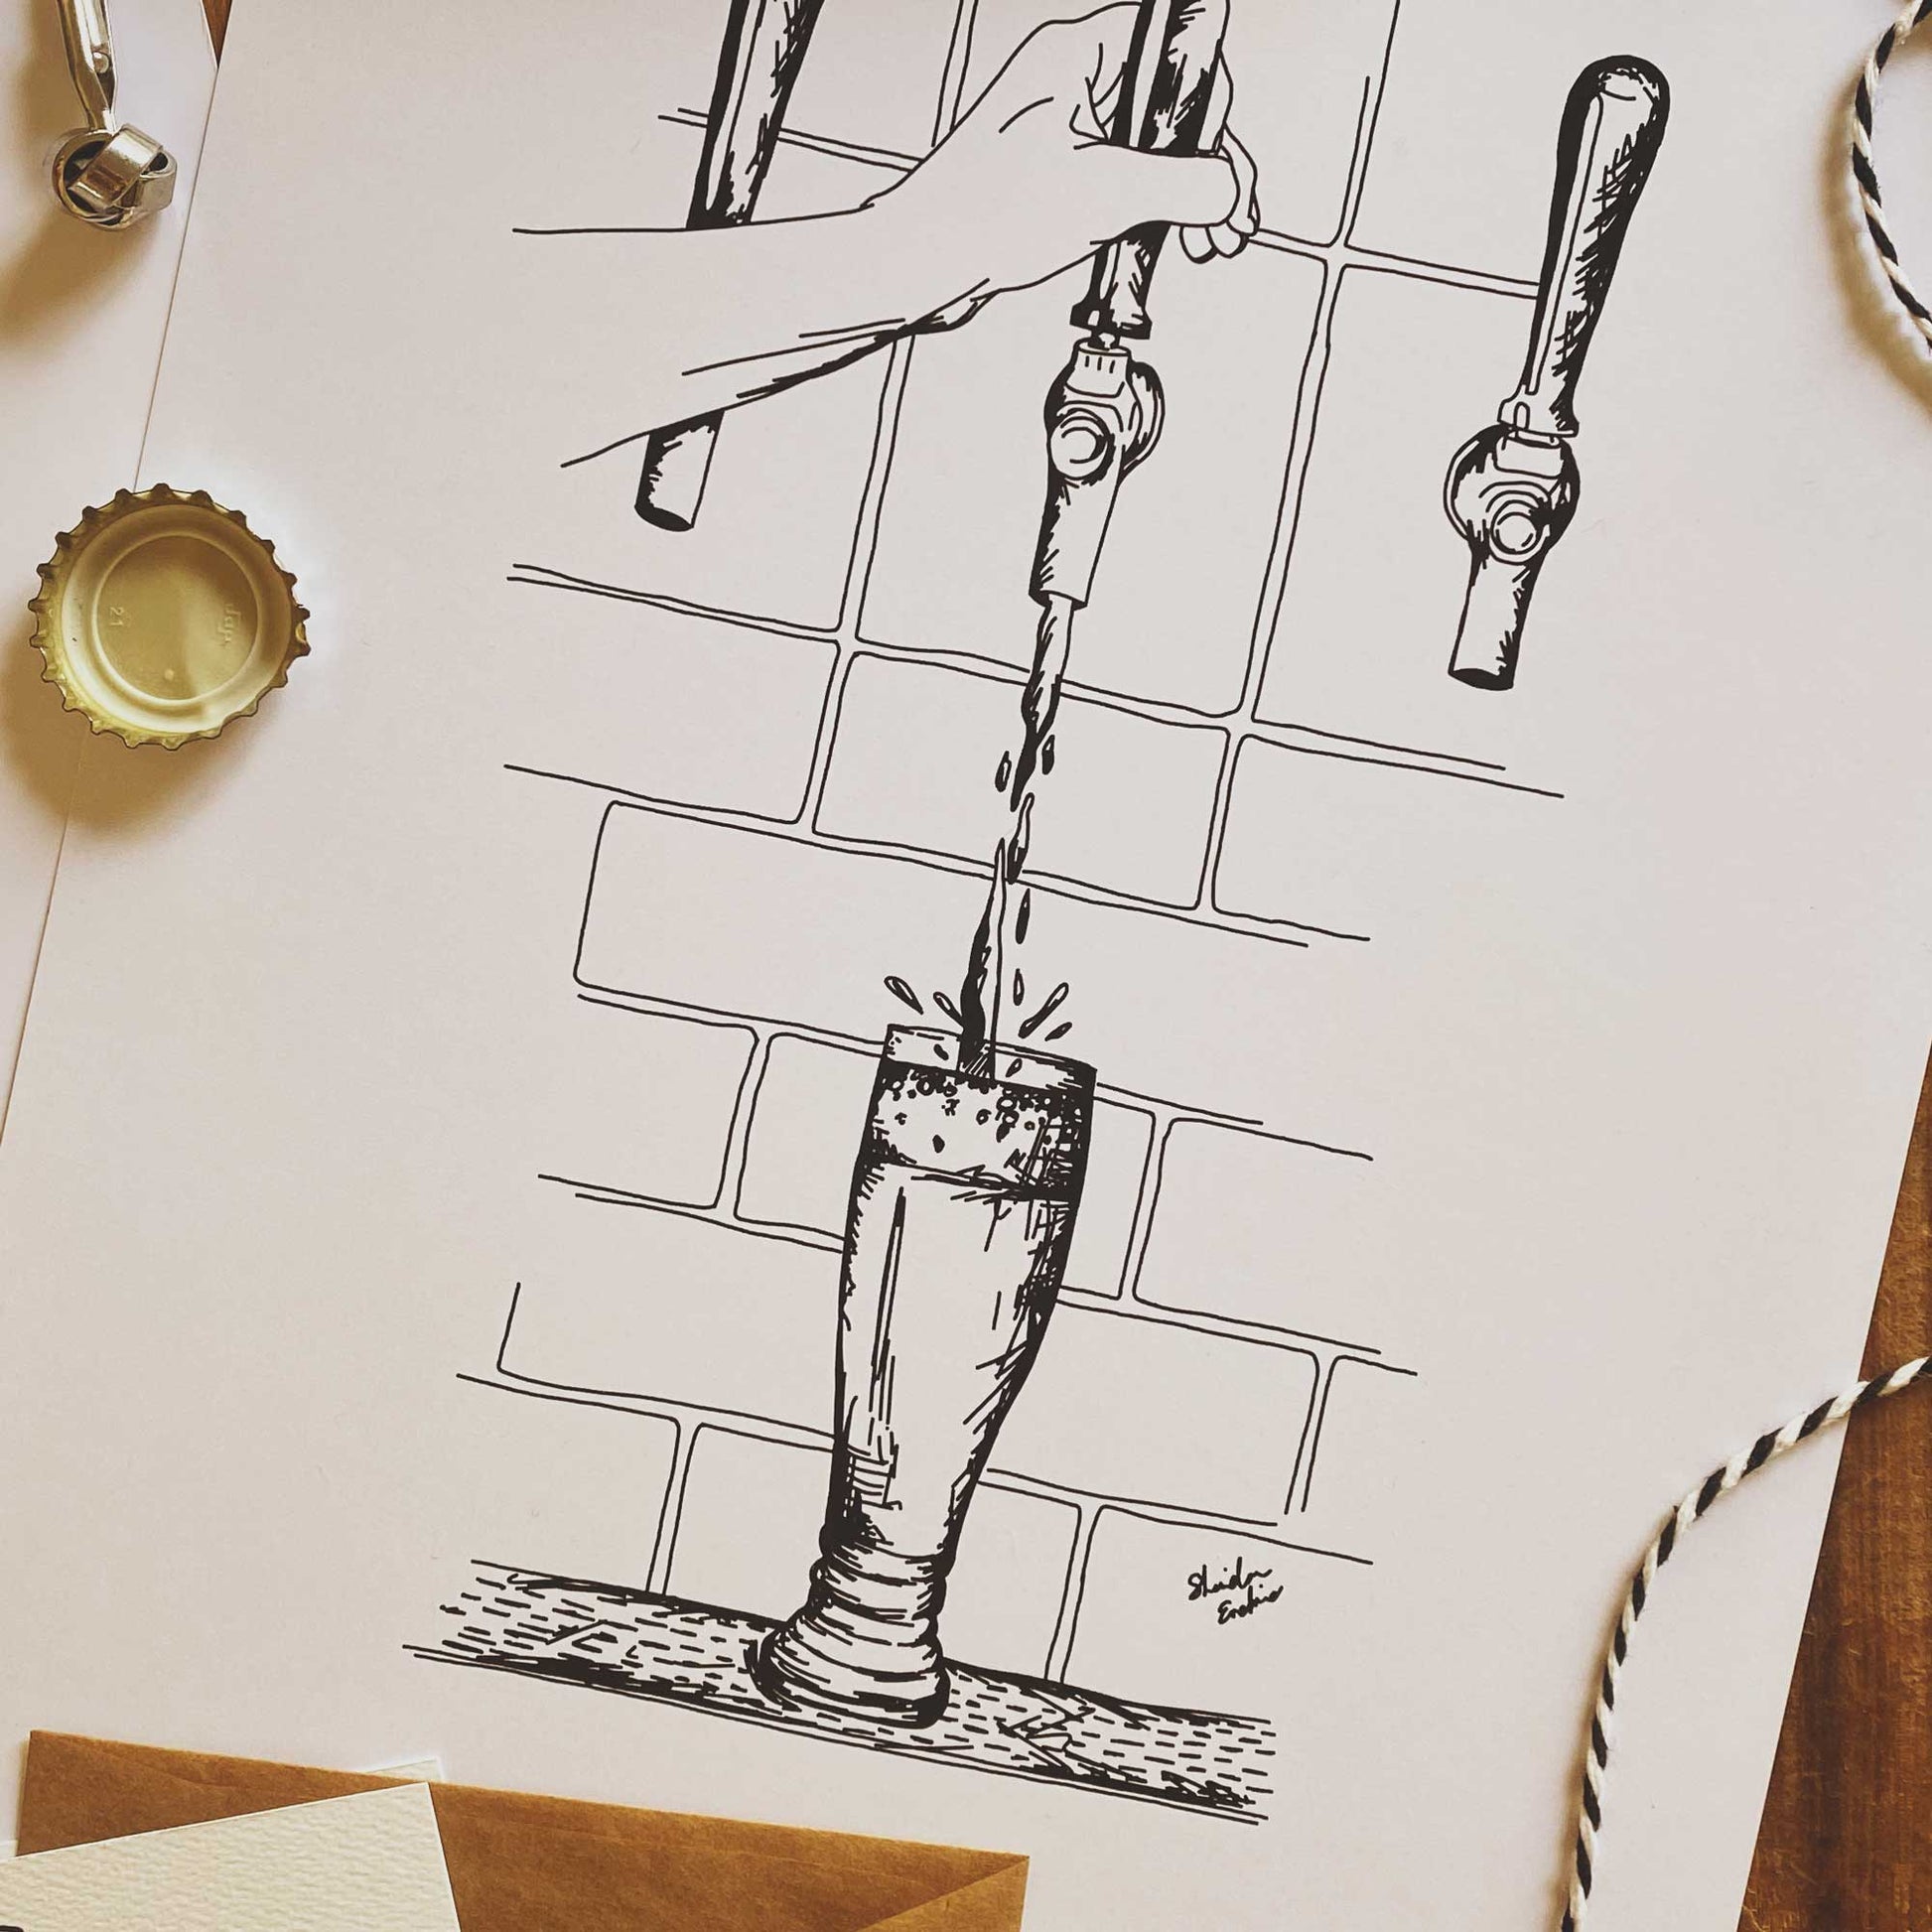 Beer Tap Illustration For Beer Lovers Available in A5, A4 & A3 - By Brisbane Illustrator